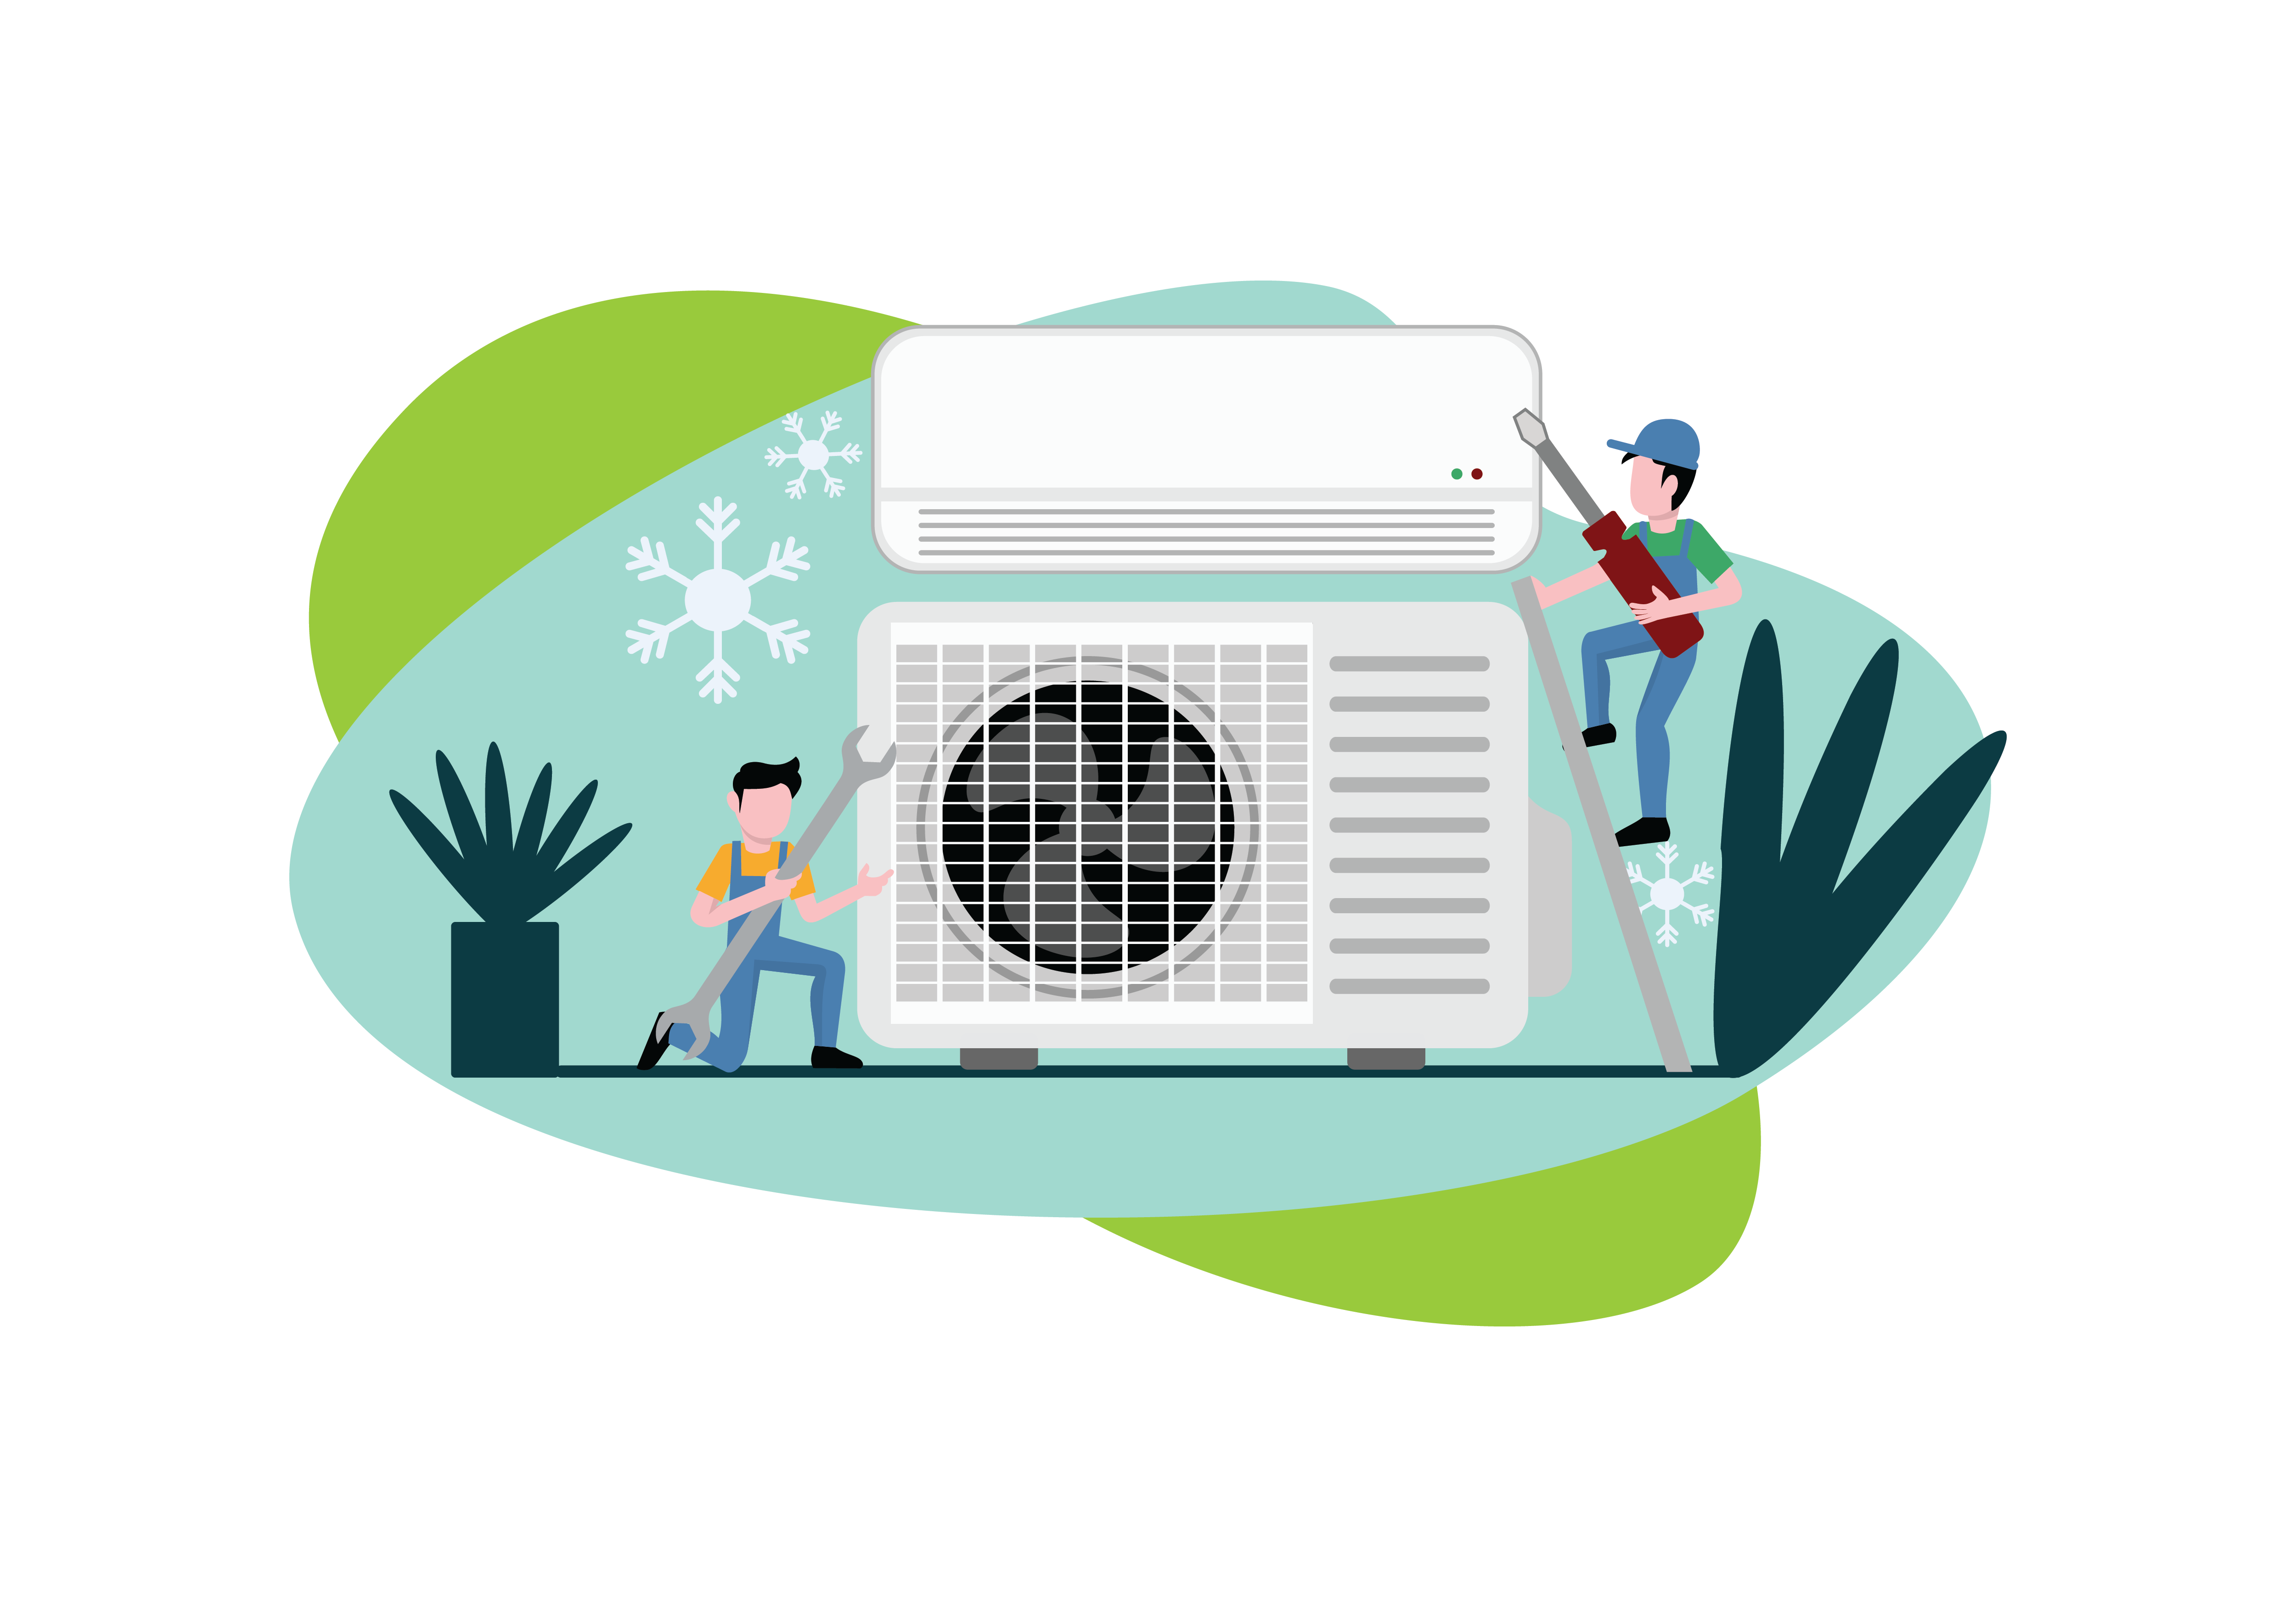 Illustration of two technicians working on an outdoor heat pump and an indoor air conditioning unit, with tools in hand, against a backdrop of abstract greenery.